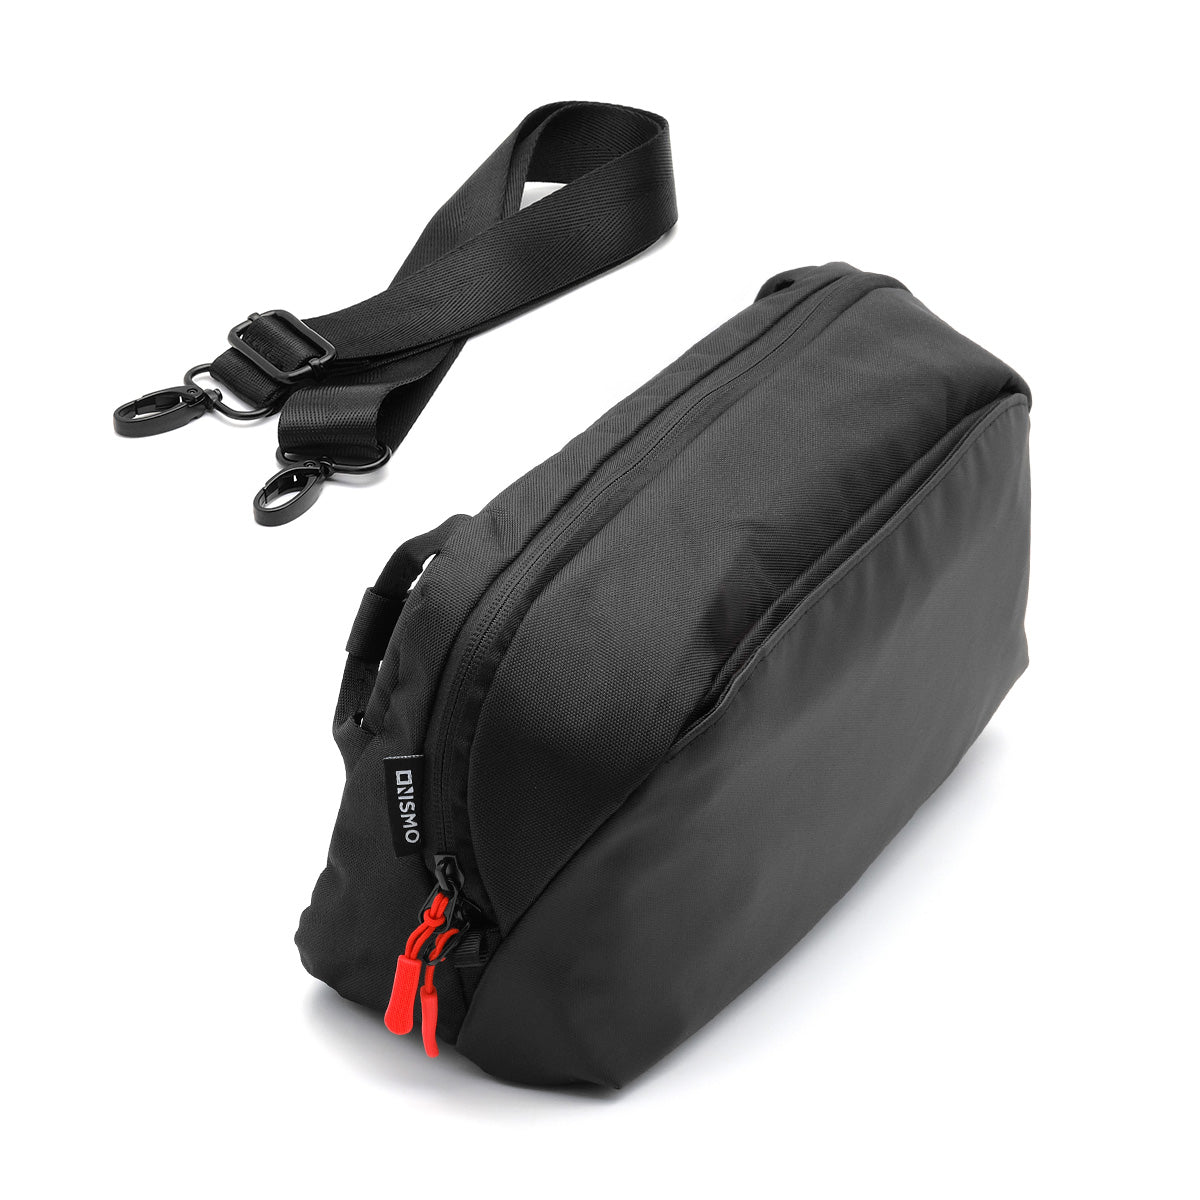 NSMO Gamer Sling Carrying Bag for Nintendo Switch, Steam Deck, ASUS ROG Ally and Handheld Console